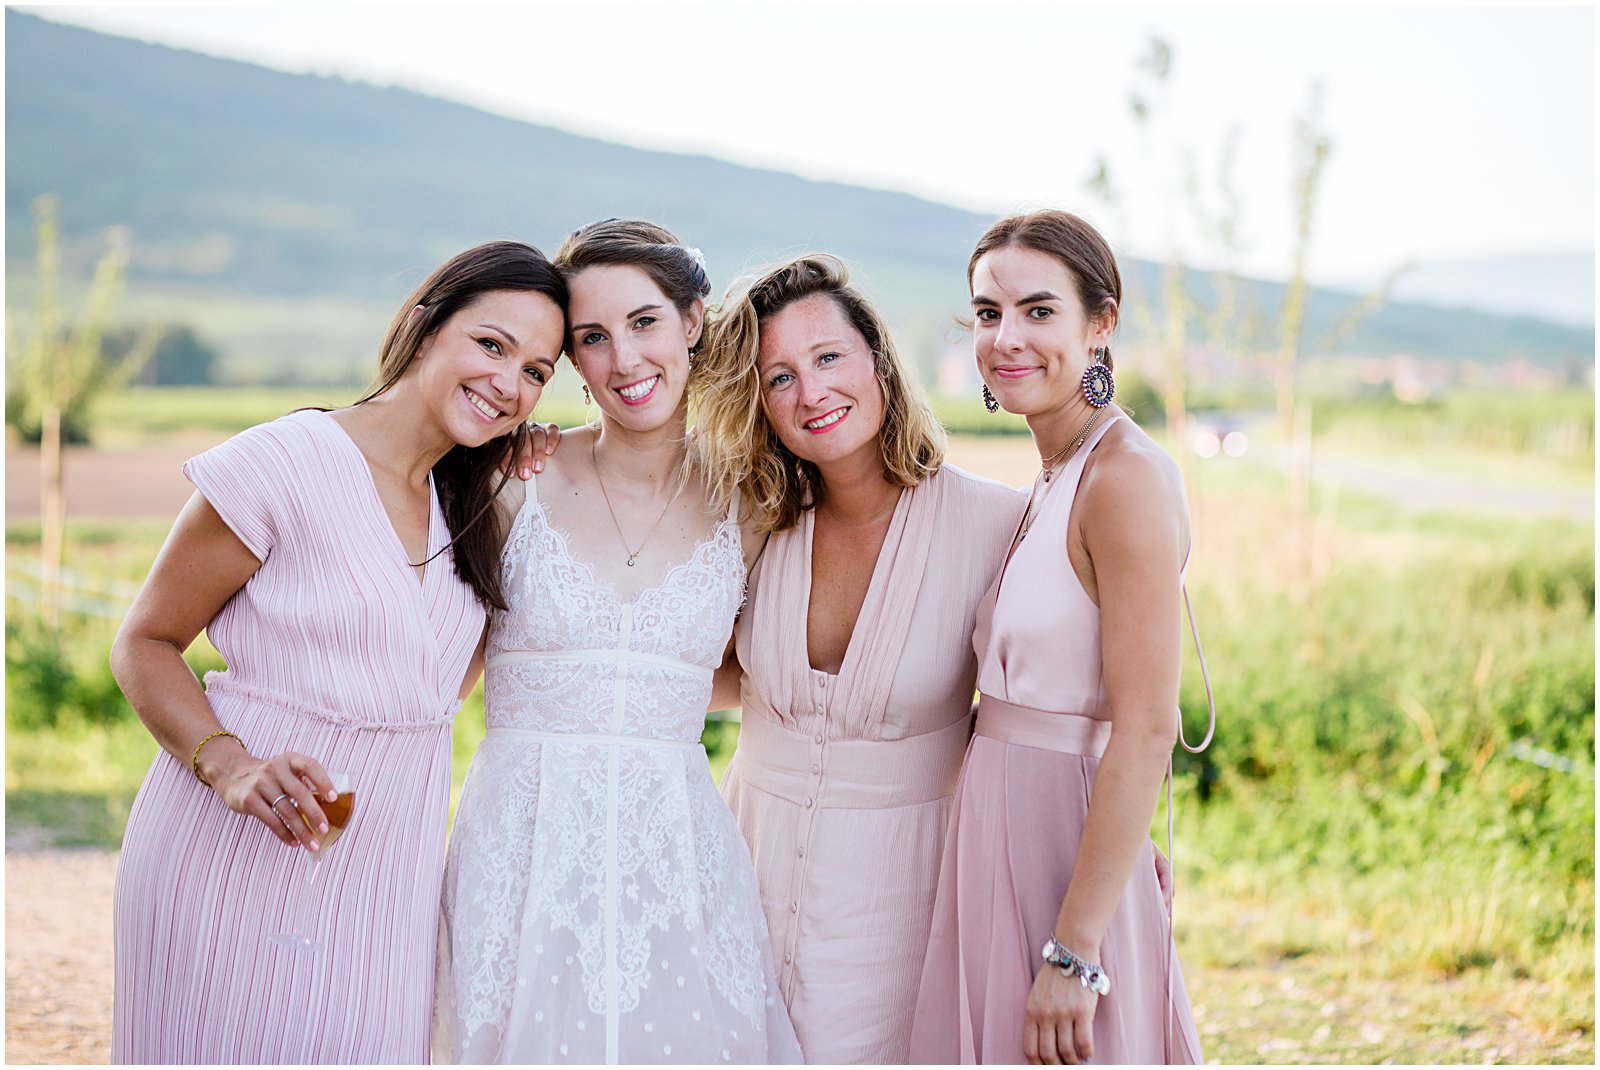 bride and bridesmaids photographed at Achilles Domaine winery in Alsace France photographed by Helena Woods